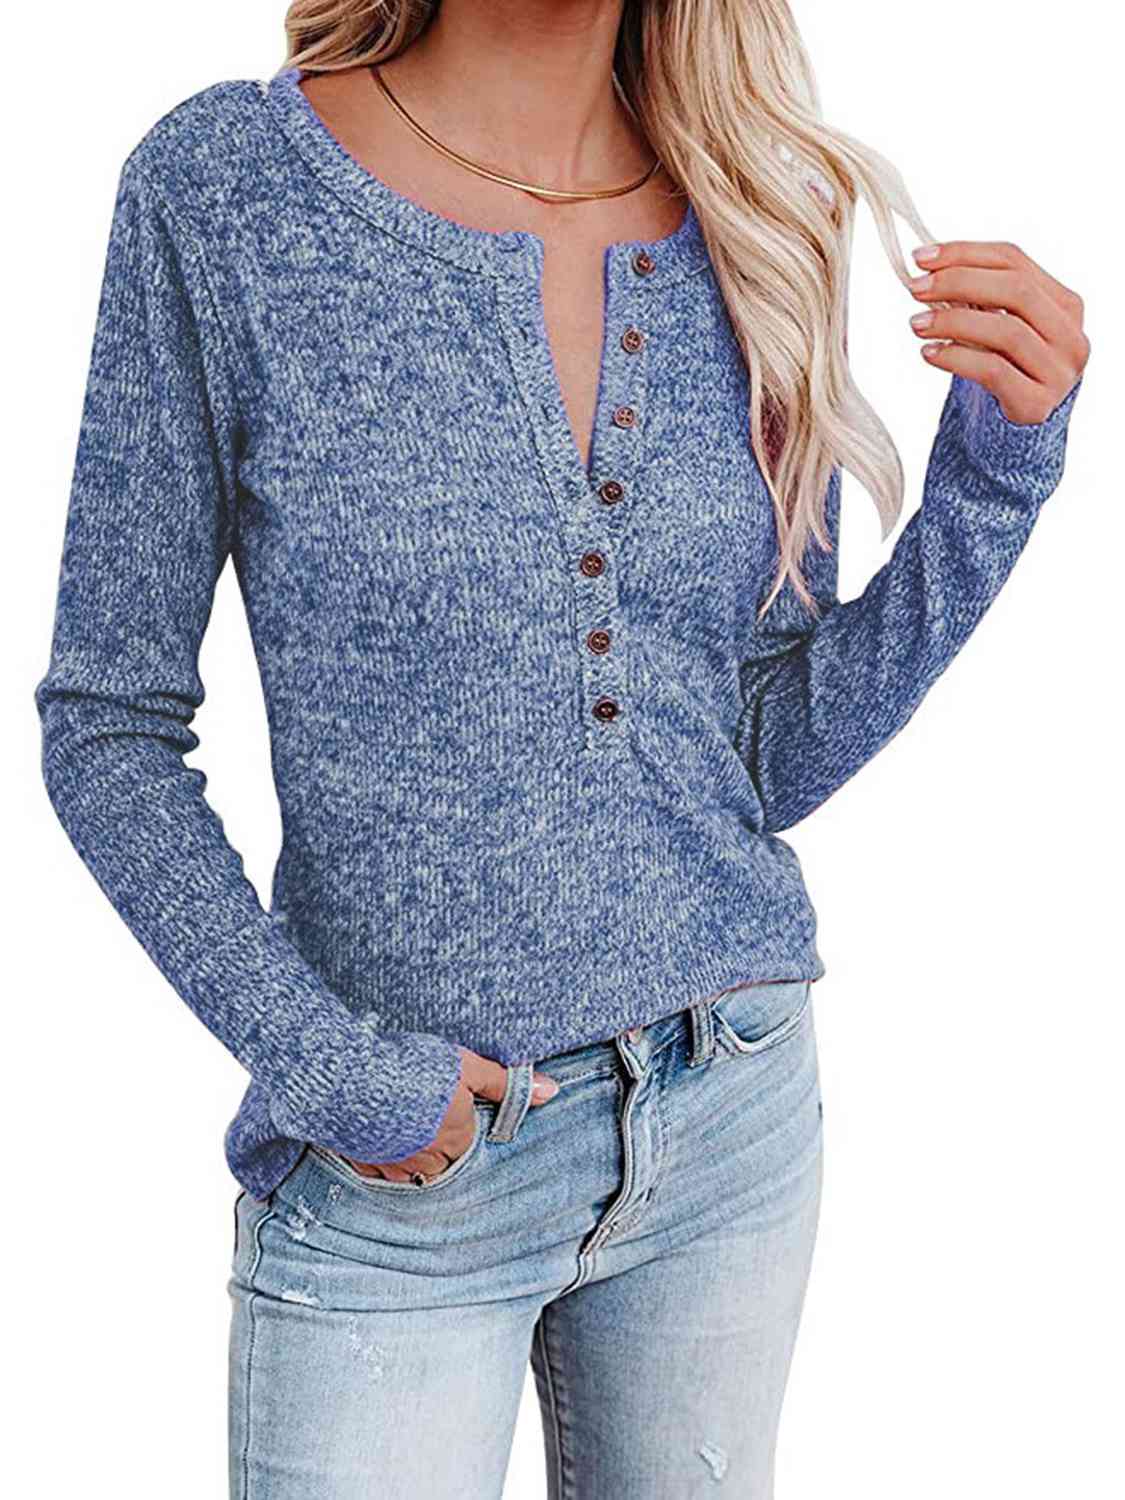 Round Neck Buttoned Long Sleeve T-Shirt